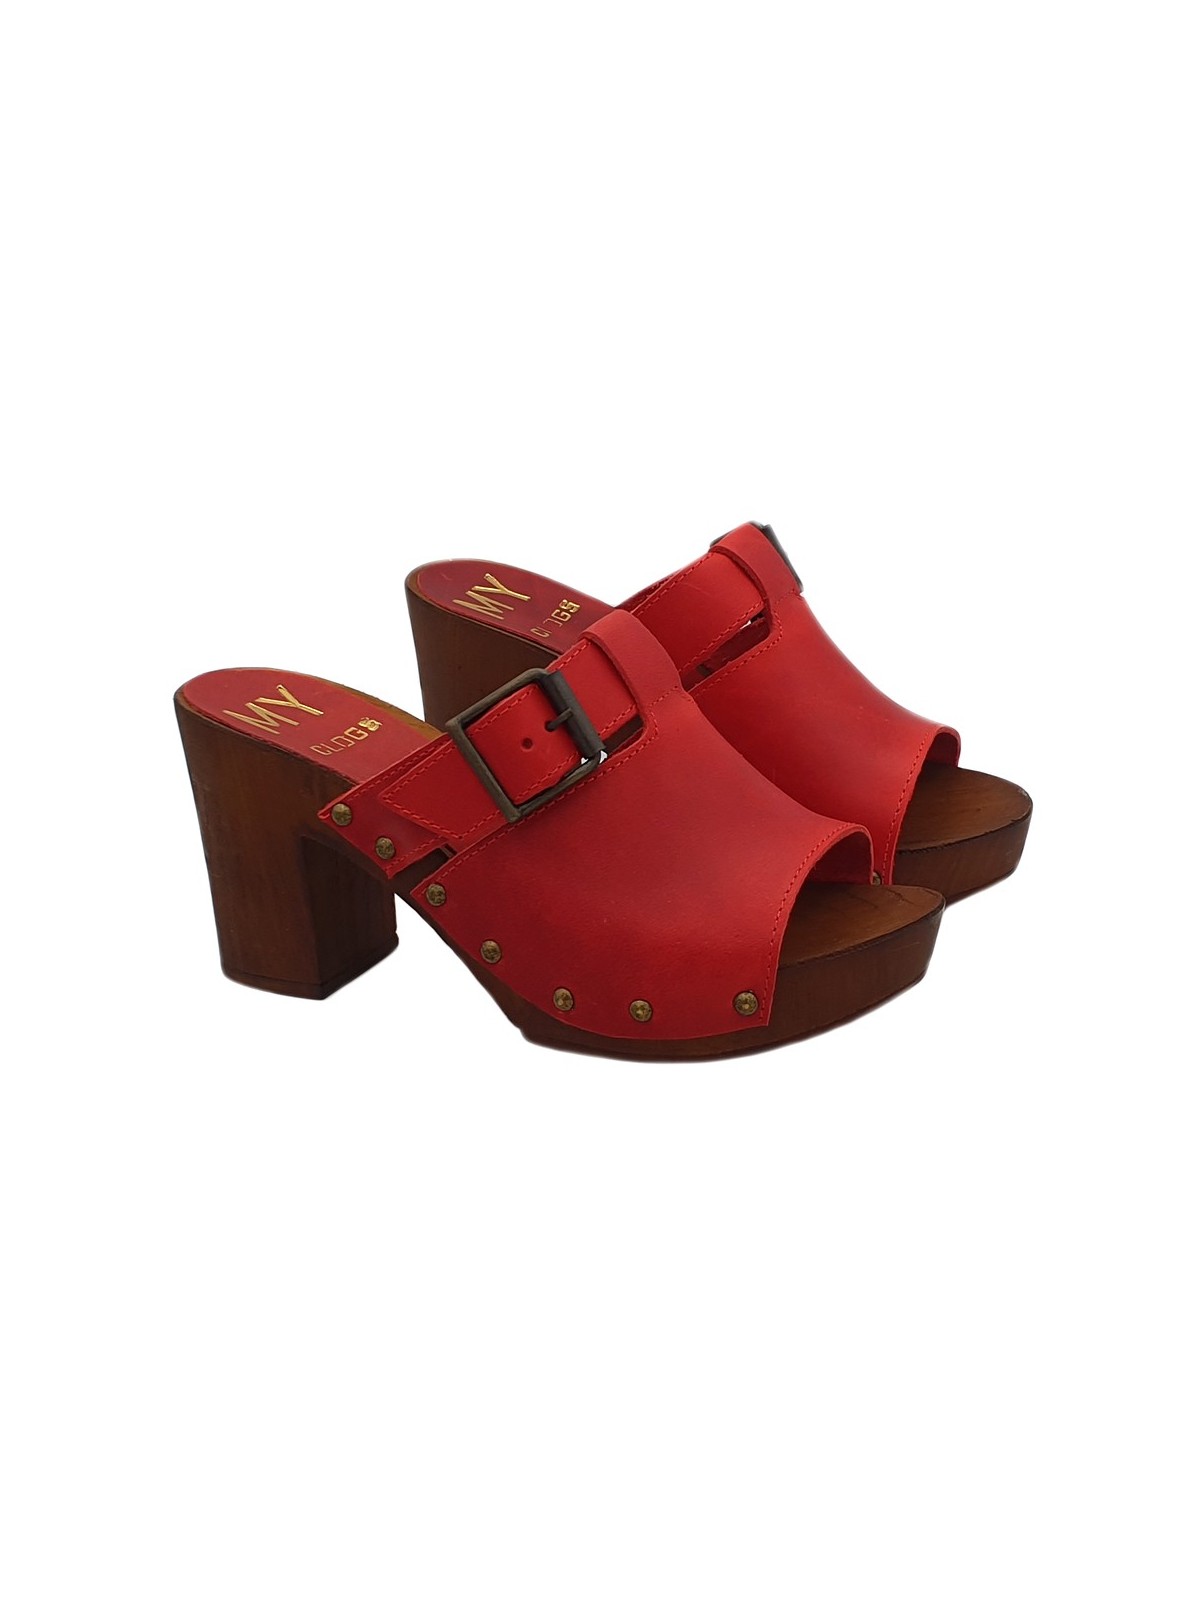 RED CLOGS IN LEATHER WITH BOUCLE